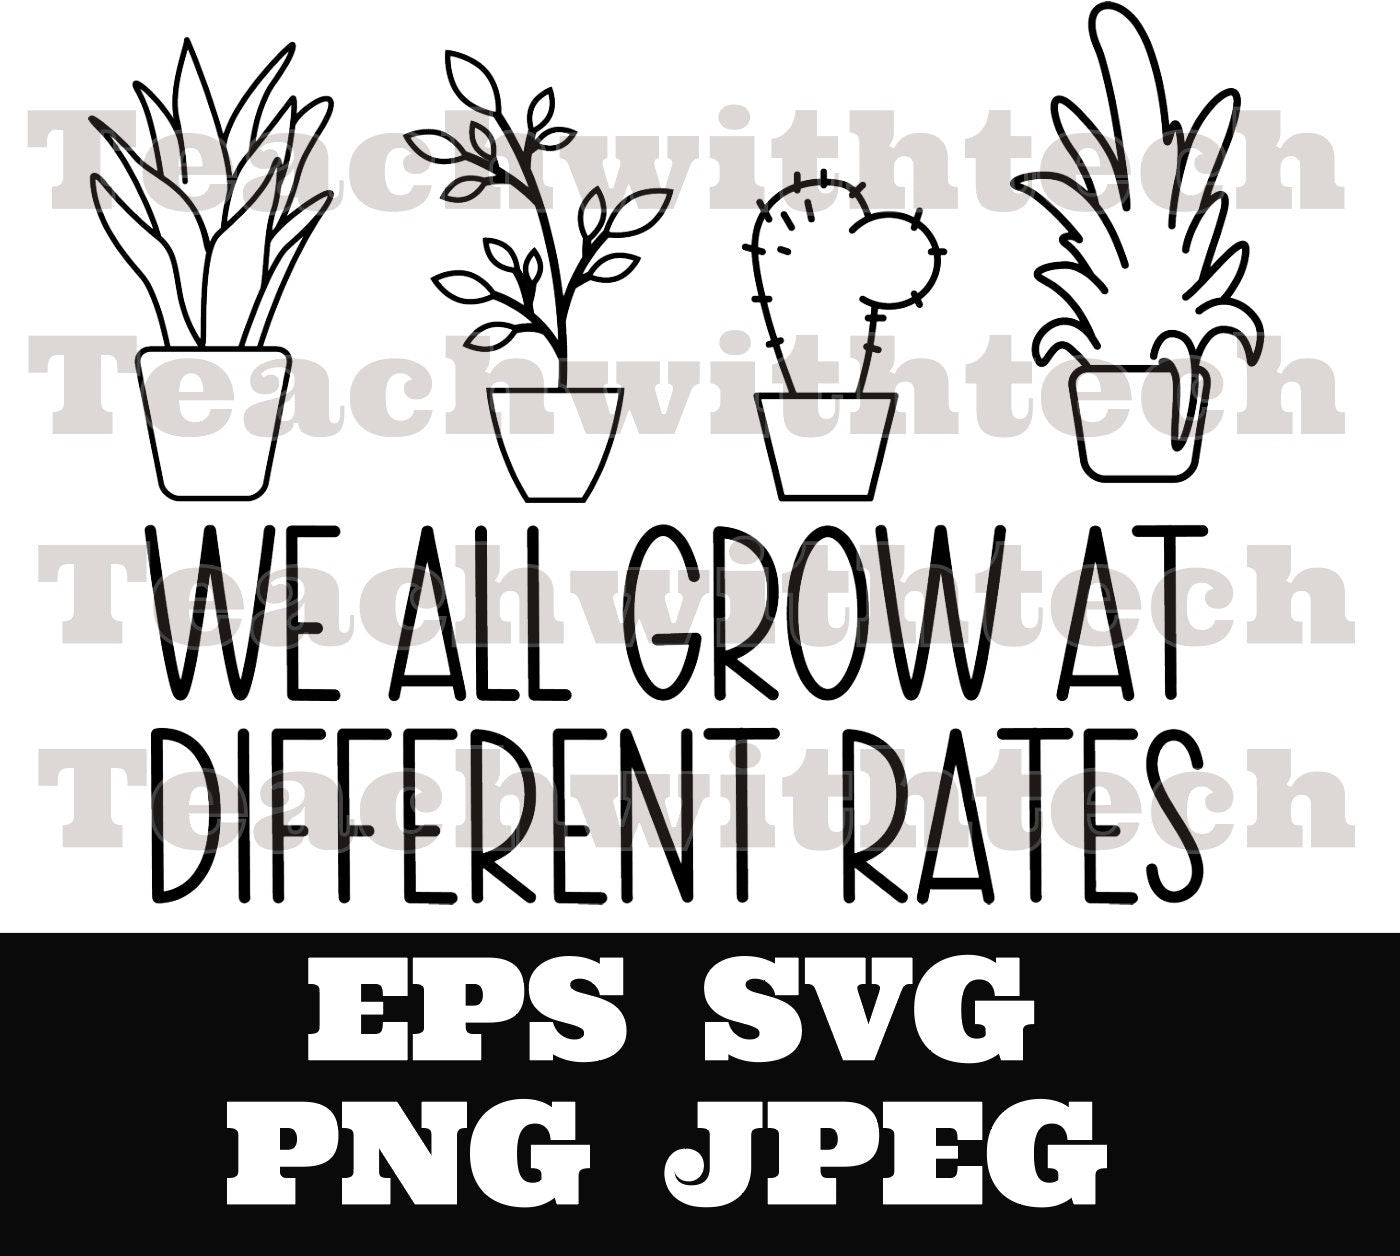 We all grow at different rates svg png eps jpeg Digital Download Teacher shirt Sublimation Cricut Silhouette Cameo Cut File School - Plants